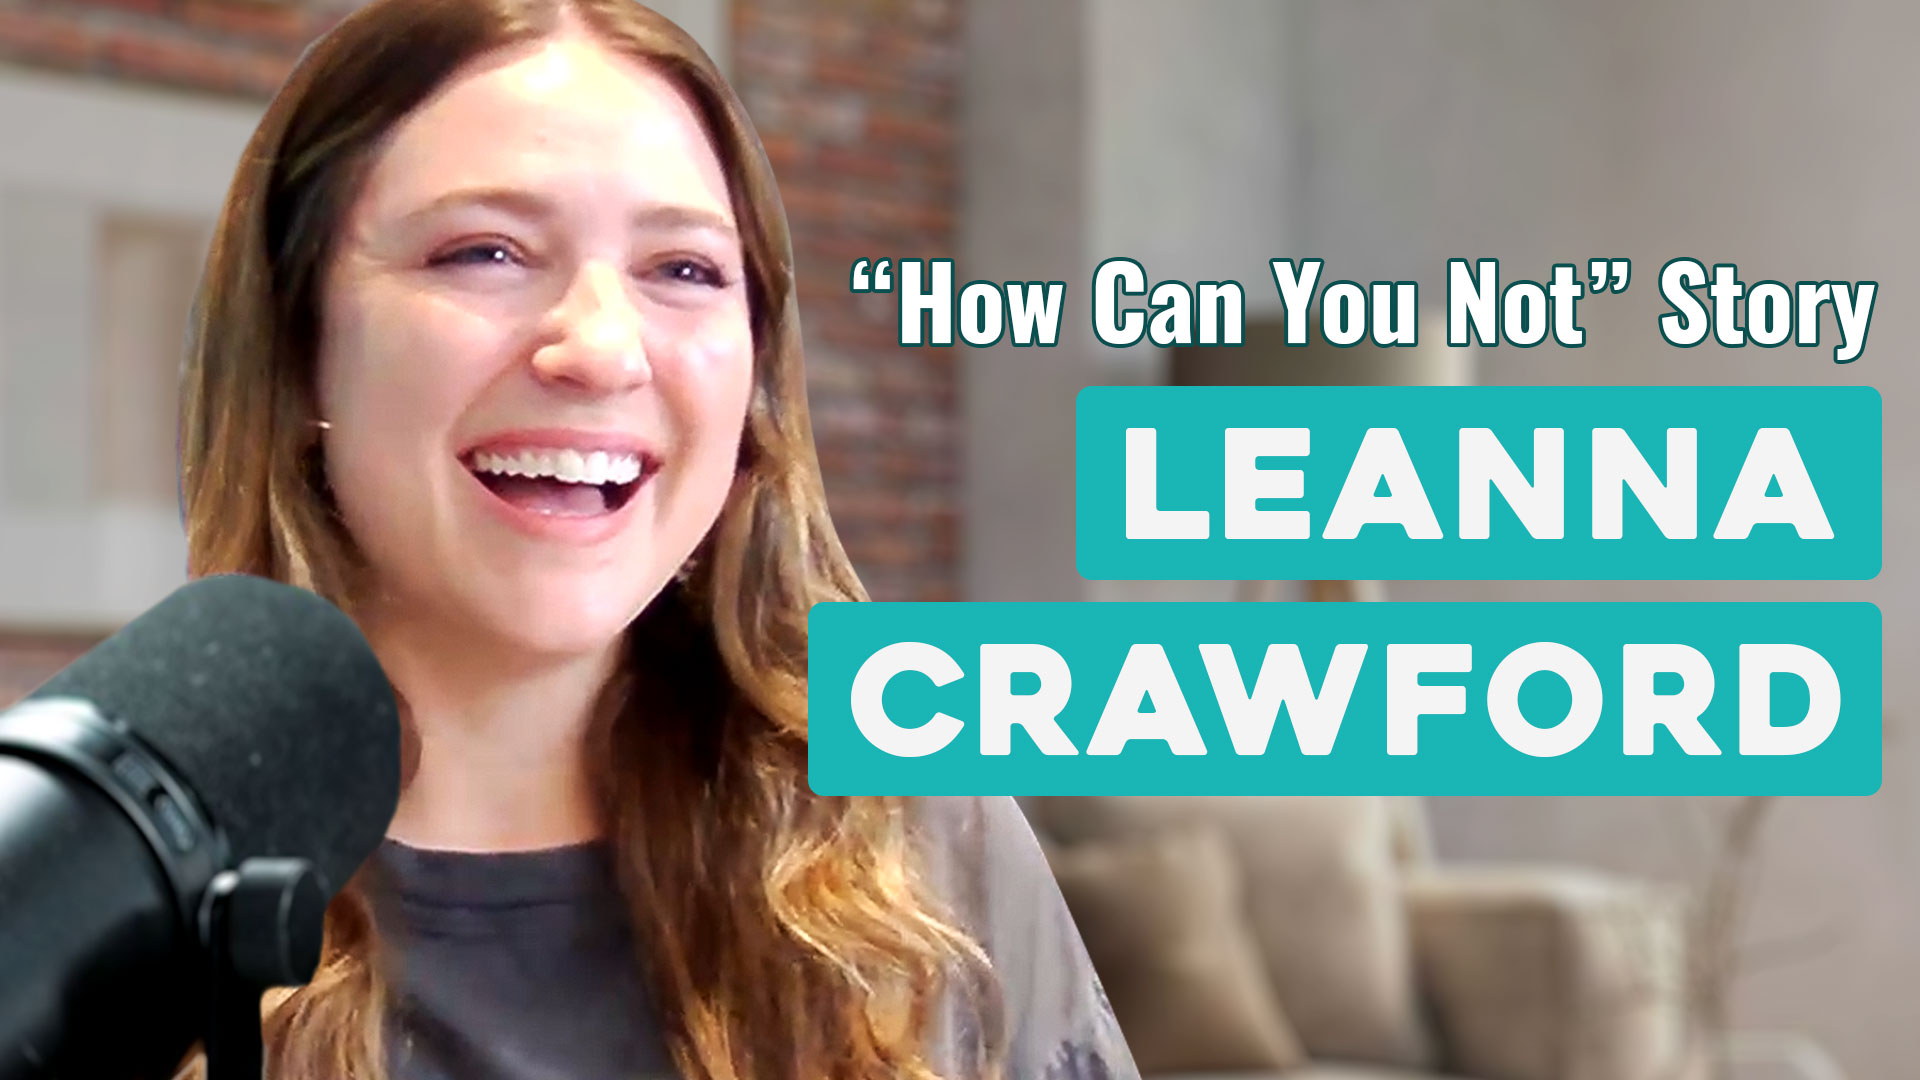 Leanna Crawford | The Story Behind “How Can You Not”